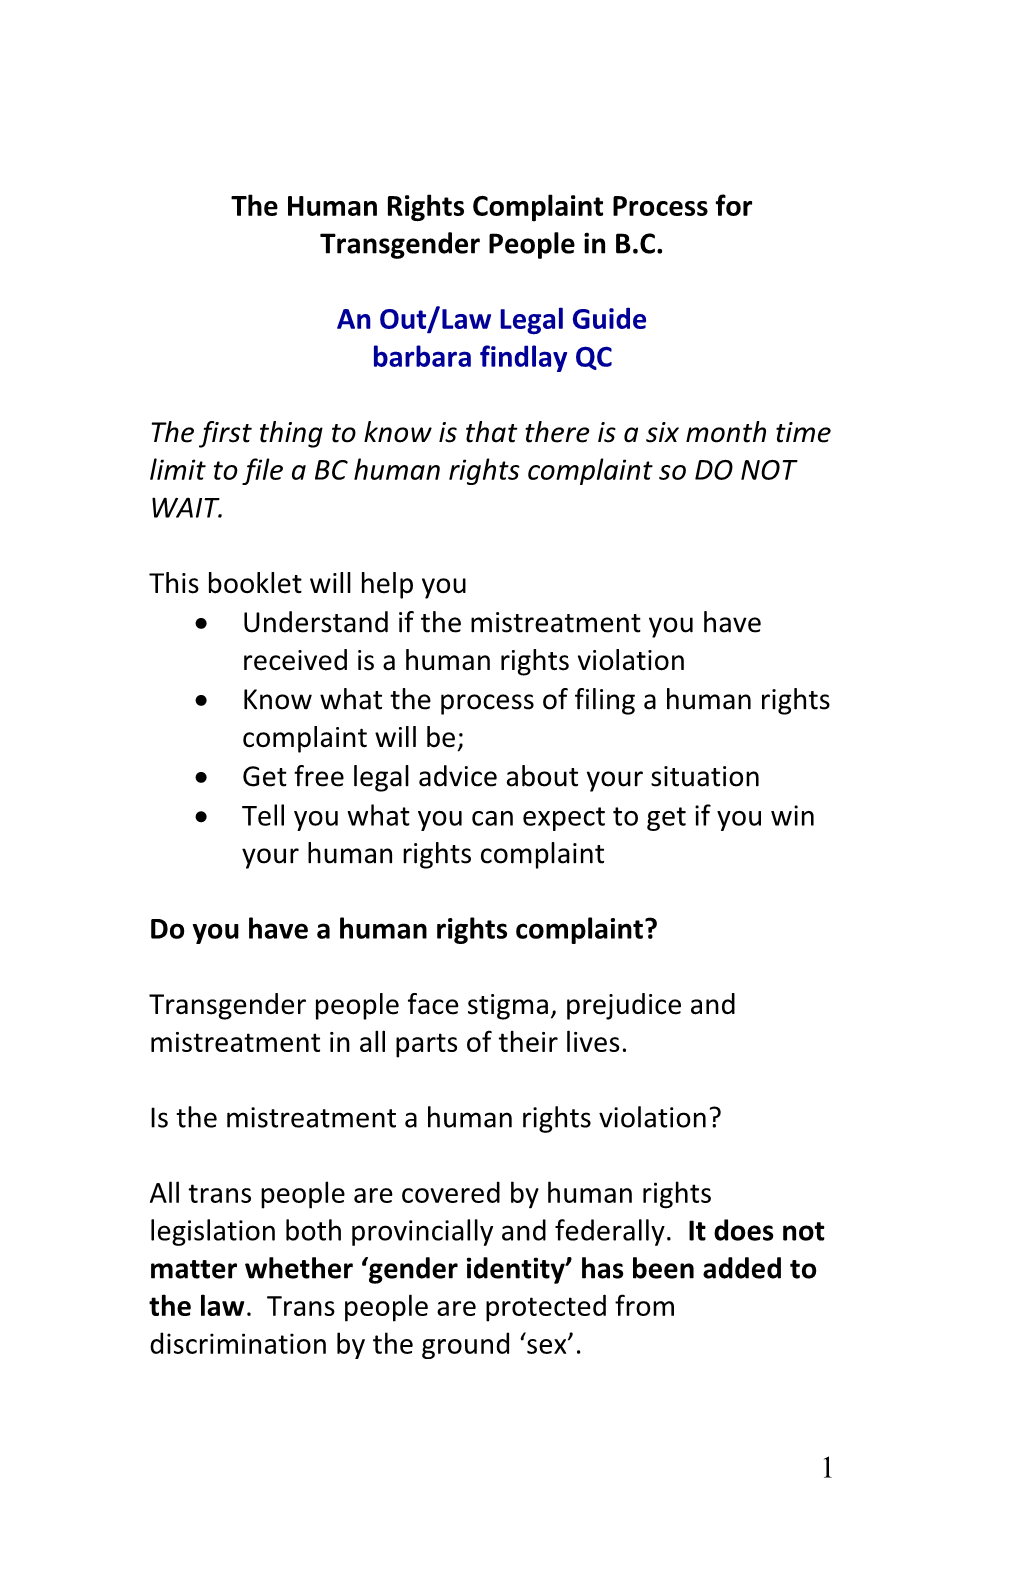 The Human Rights Complaint Process for Transgender People in B